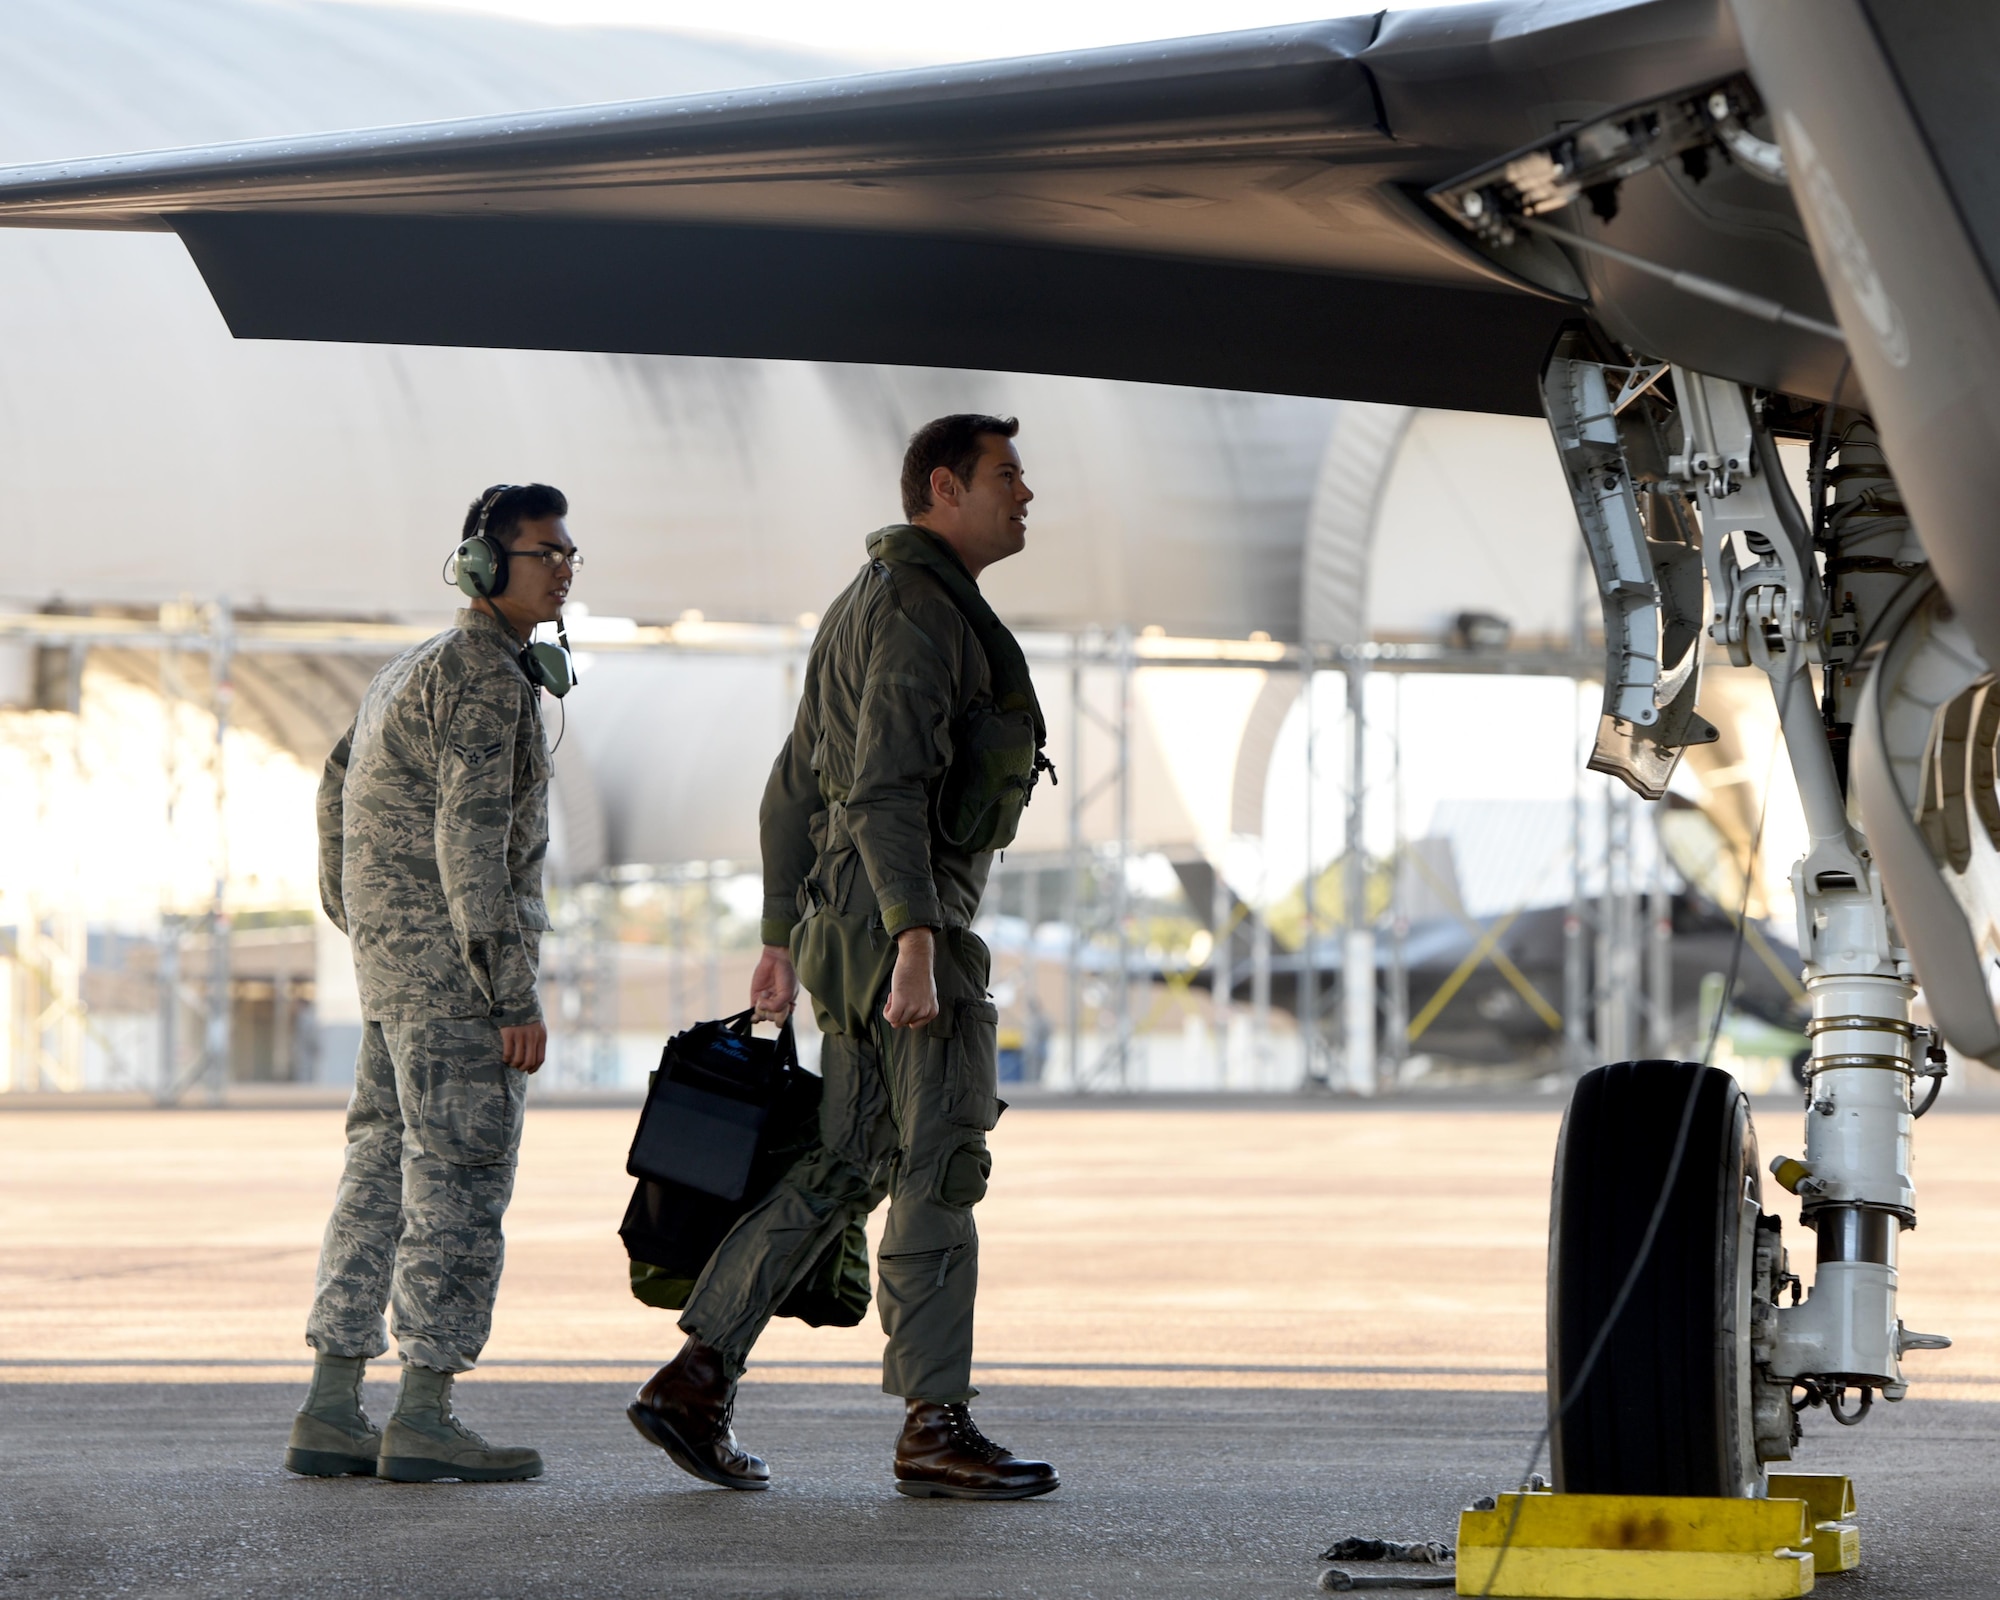 U.S. Navy Lt. Cmdr. Charles Escher, Strike Fighter Squadron (VFA-101) operations officer, completes a walk-around prior to flying an Air Force F-35A Dec. 6, 2016, at Eglin Air Force Base, Florida. For only the second time at Eglin AFB, a Naval Aviator has been selected to dual qualify in the U.S. Navy’s F-35C and the Air Force’s F-35A. Escher plans to use what he learns from his experience with the 33 FW to help the F-35 enterprise grow. He looks to join a group of test pilots at Edwards AFB, California, where he will have the opportunity to be the Navy’s voice for the aircraft weapons and vehicle system development. (U.S. Air Force photo/ Staff Sgt. Peter Thompson)